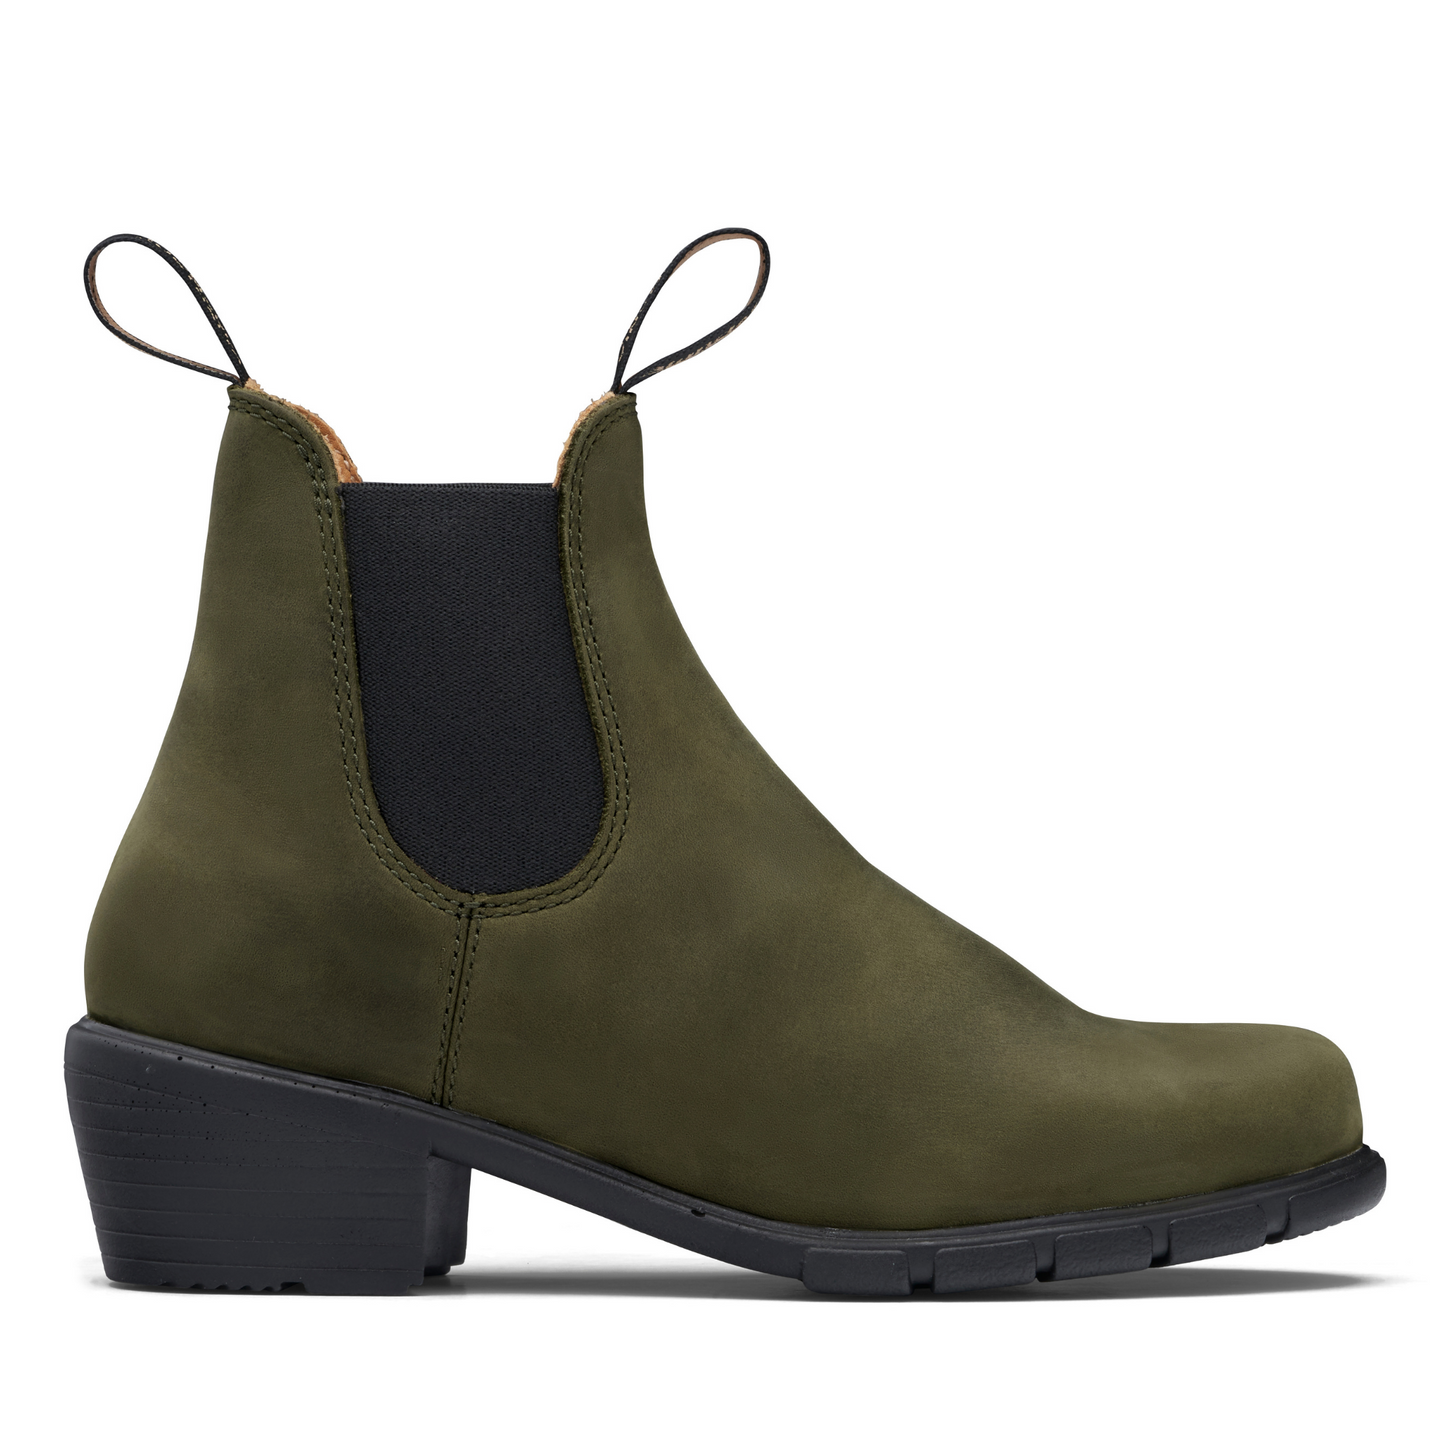 Side view of the right olive green leather boot. Mid-height heel with a black sole and tan colour interior lining